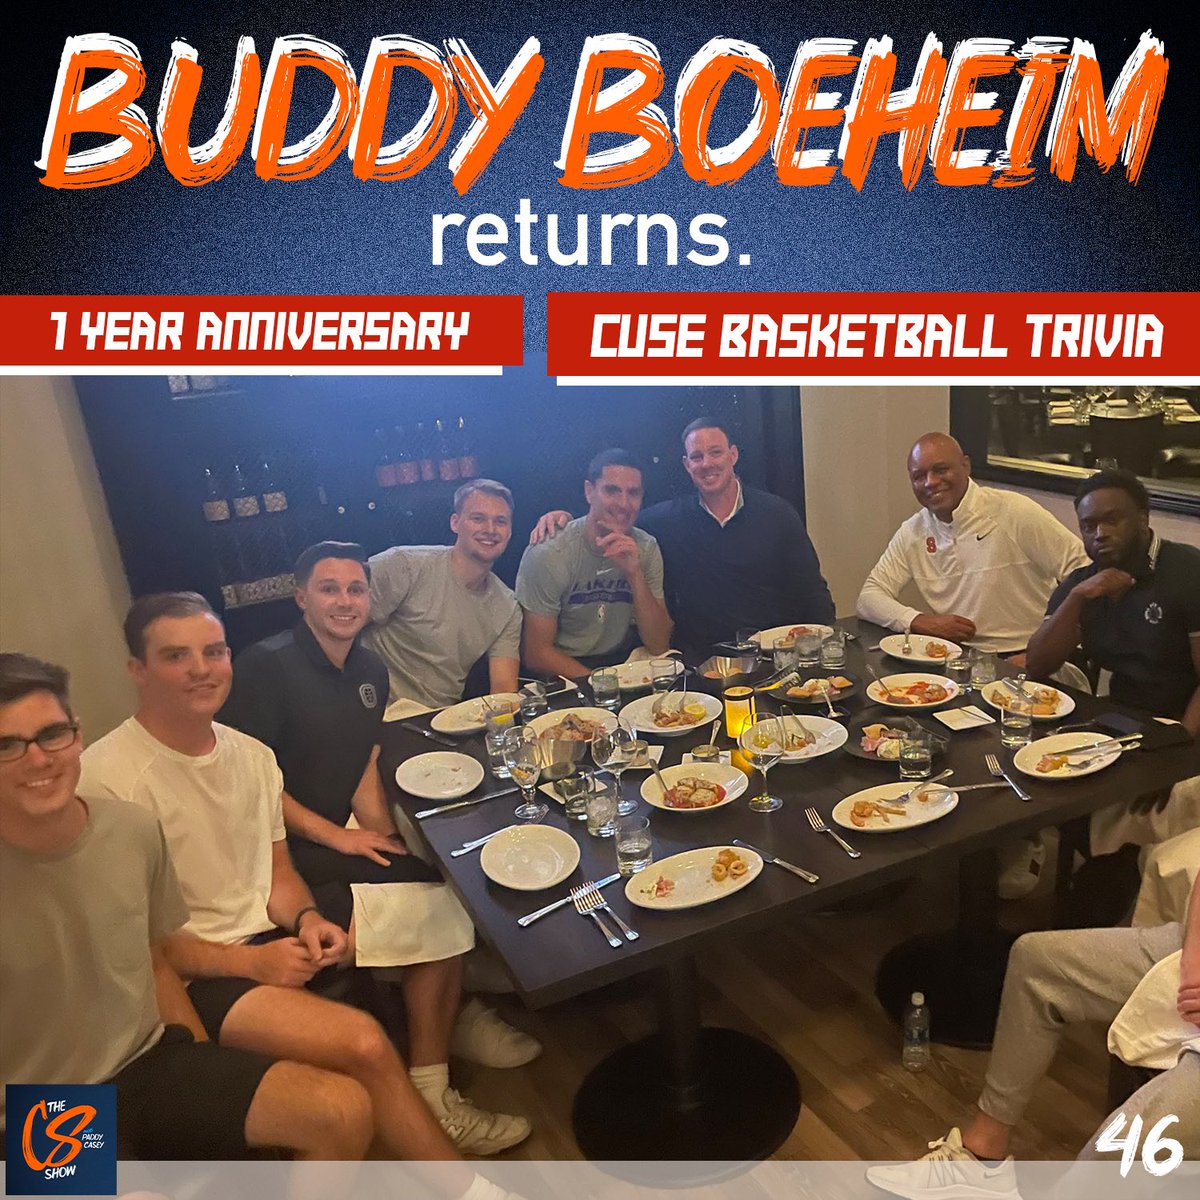 On the one year anniversary of the Swider Show premiere, episode 46 is now available everywhere! Buddy is back for a Cuse Basketball Trivia Battle and much more! Listen or watch now!